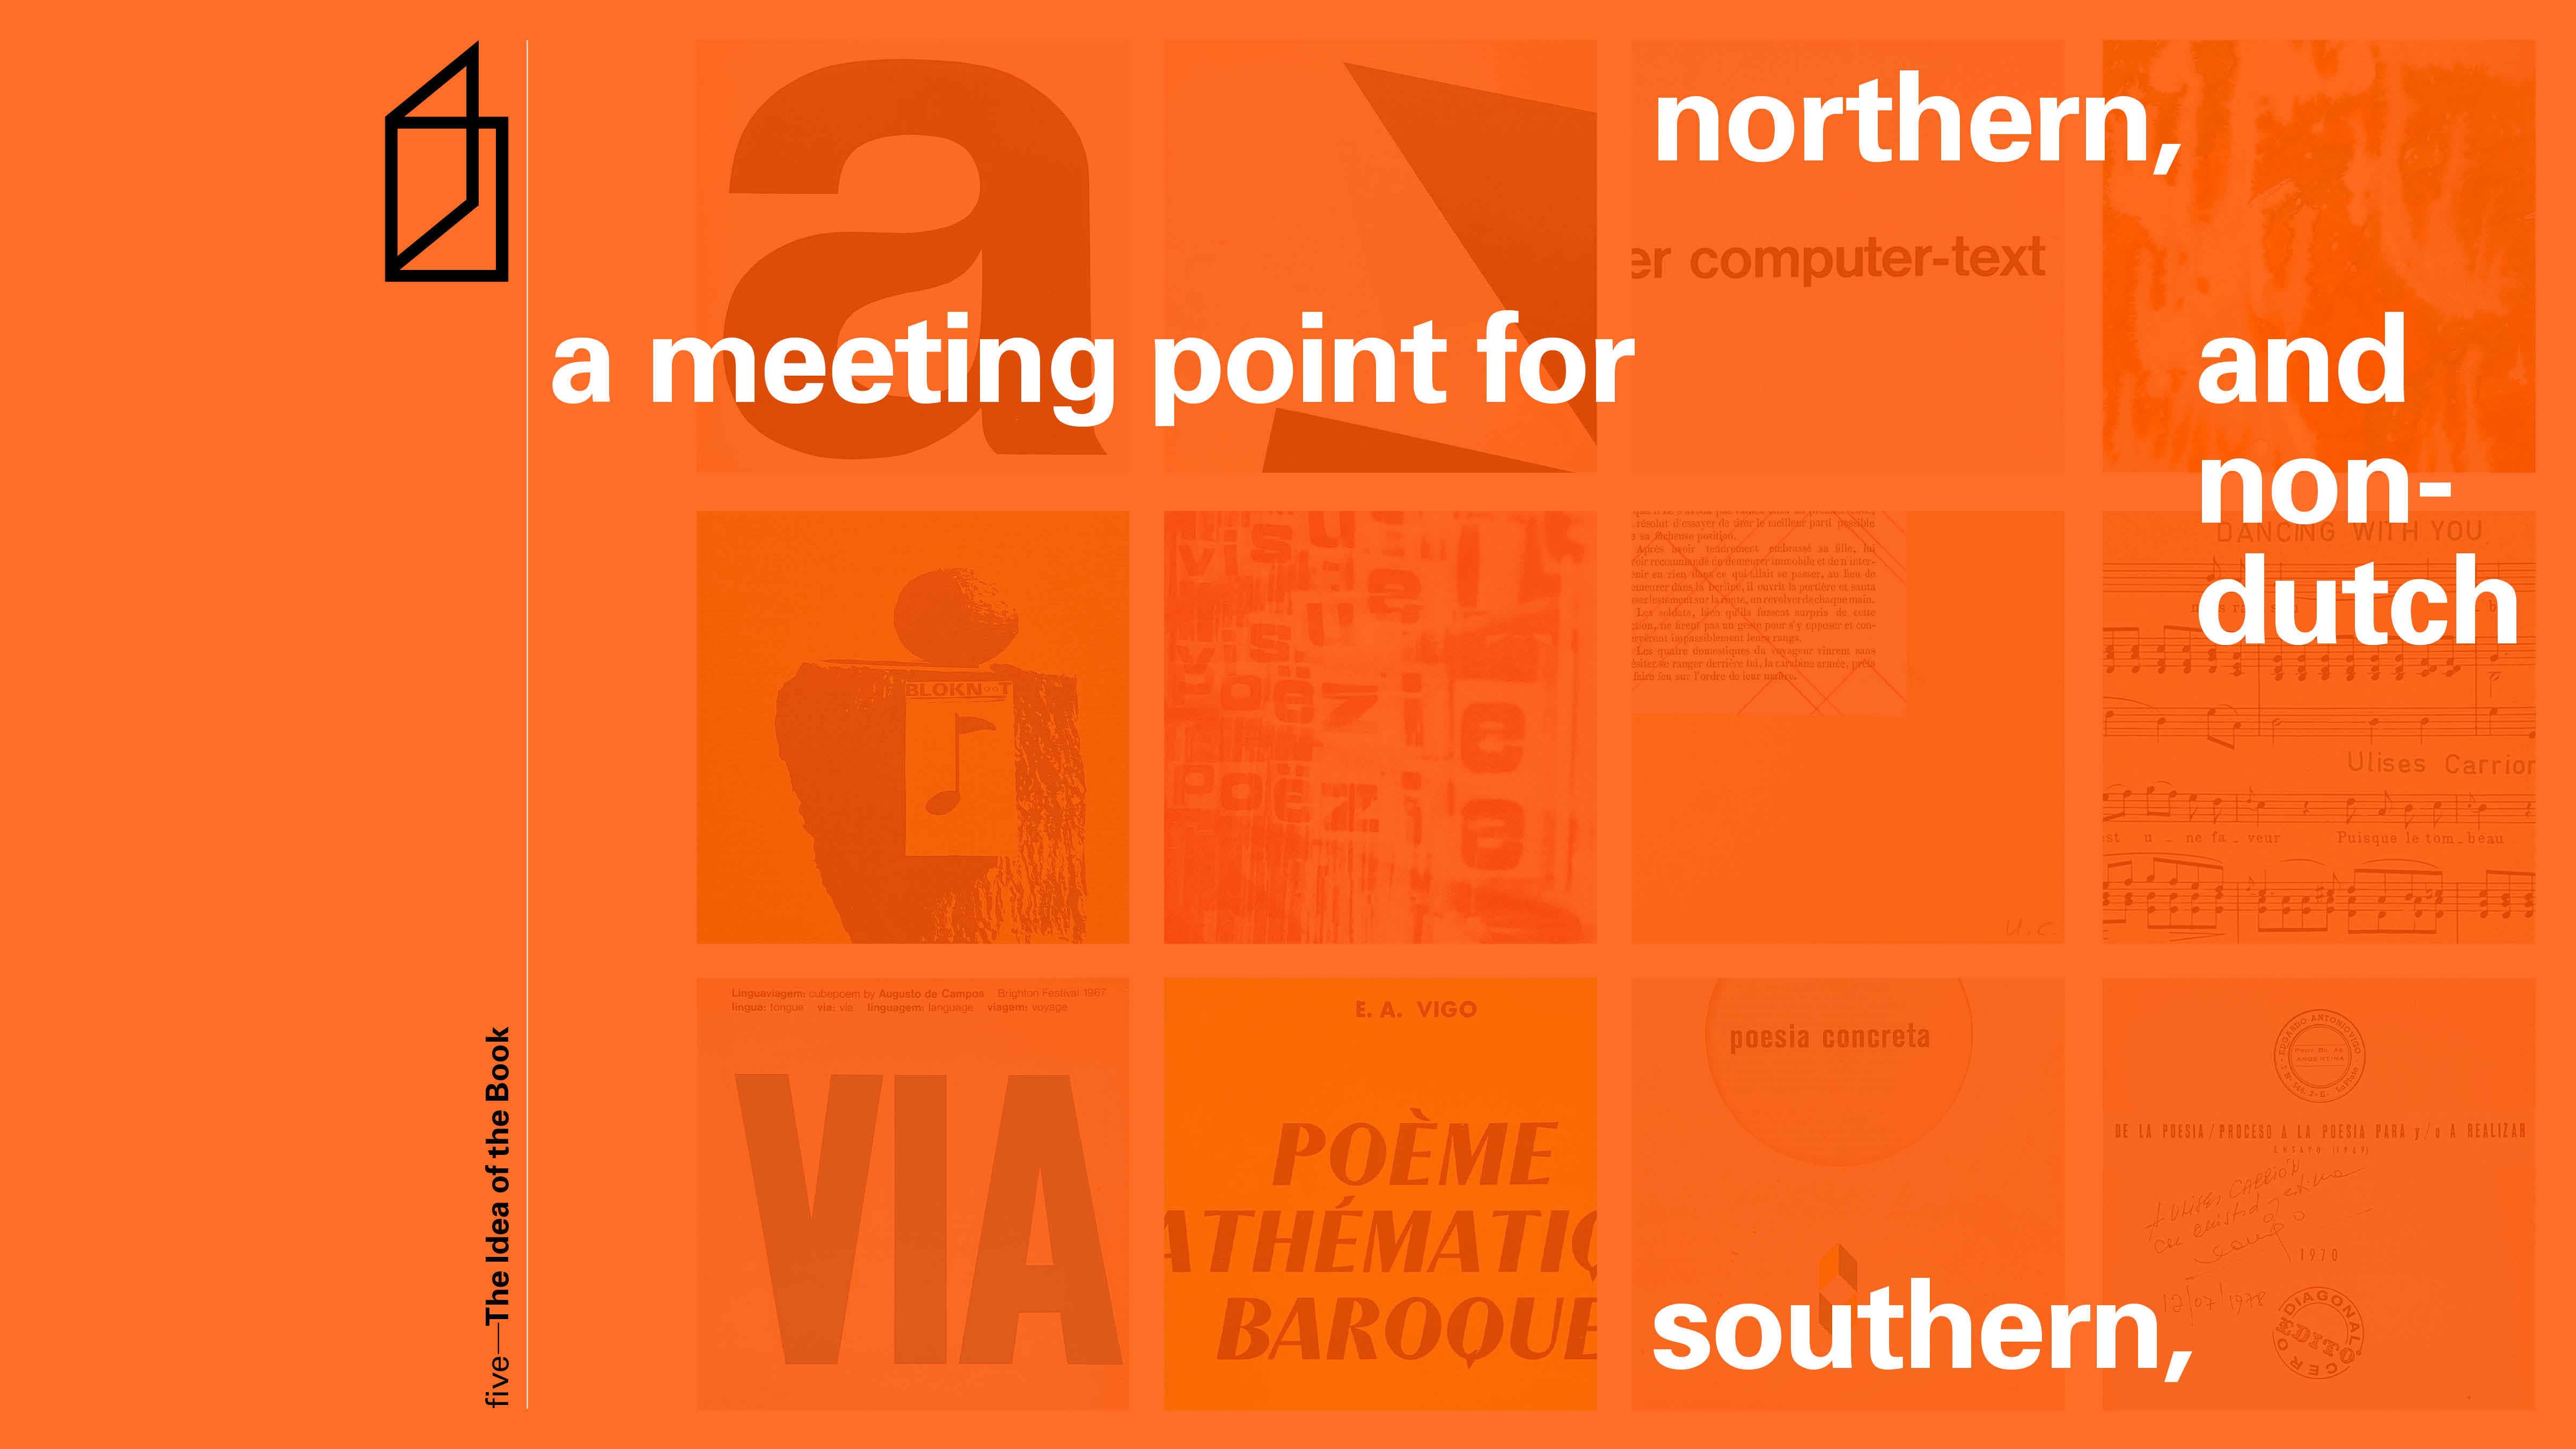 tiotb no. 5—a meeting point for northern, southern, and non-dutch